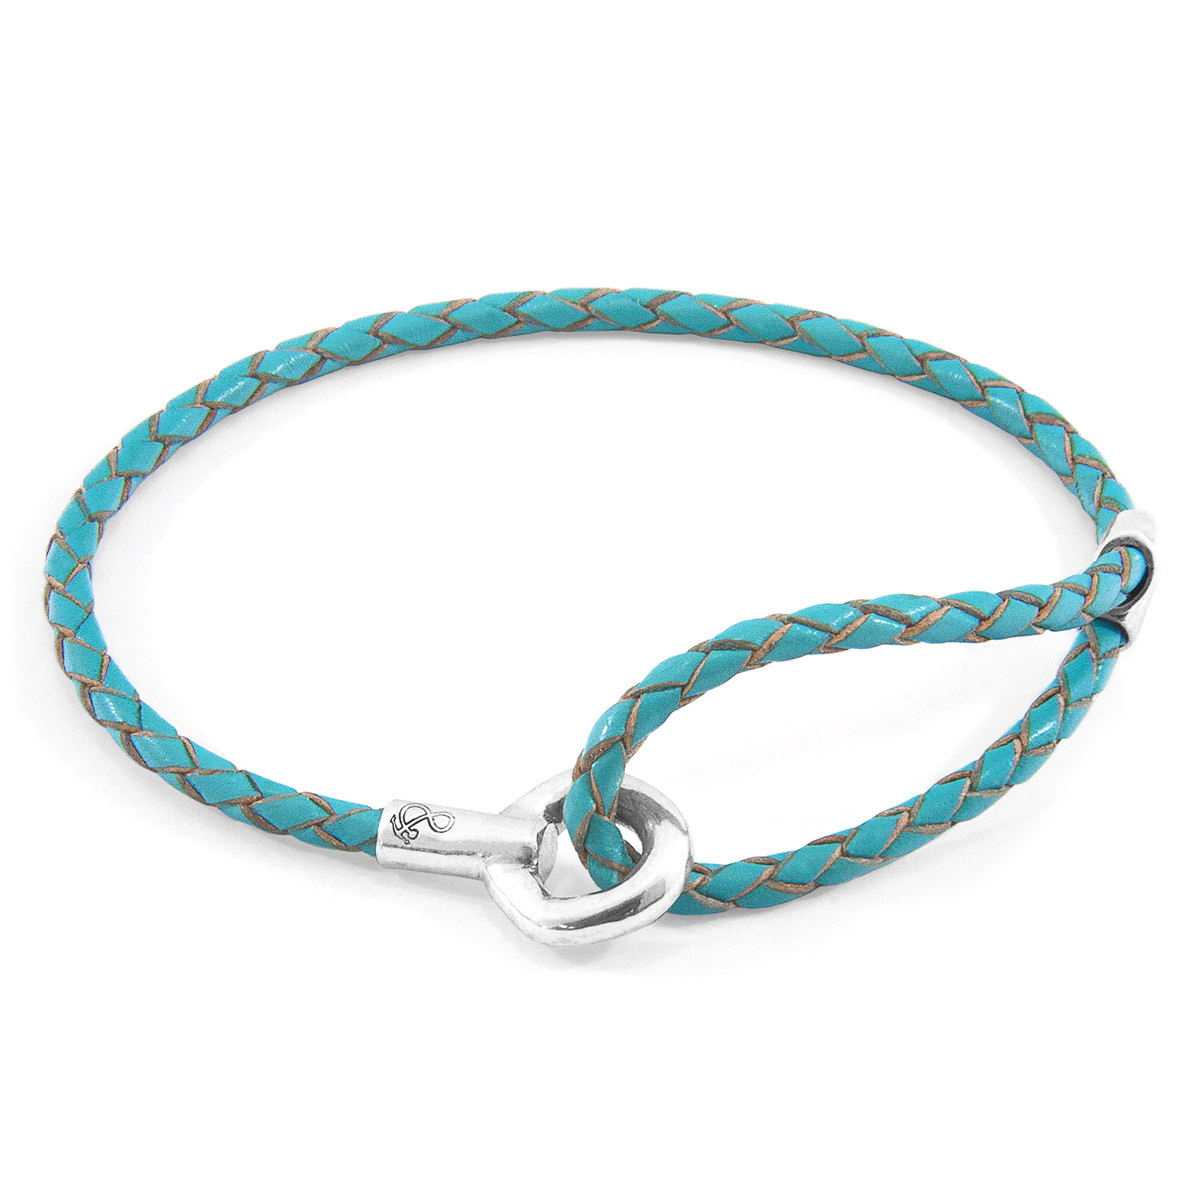 Anchor & Crew Turquoise Blue Blake Silver and Braided Leather Bracelet